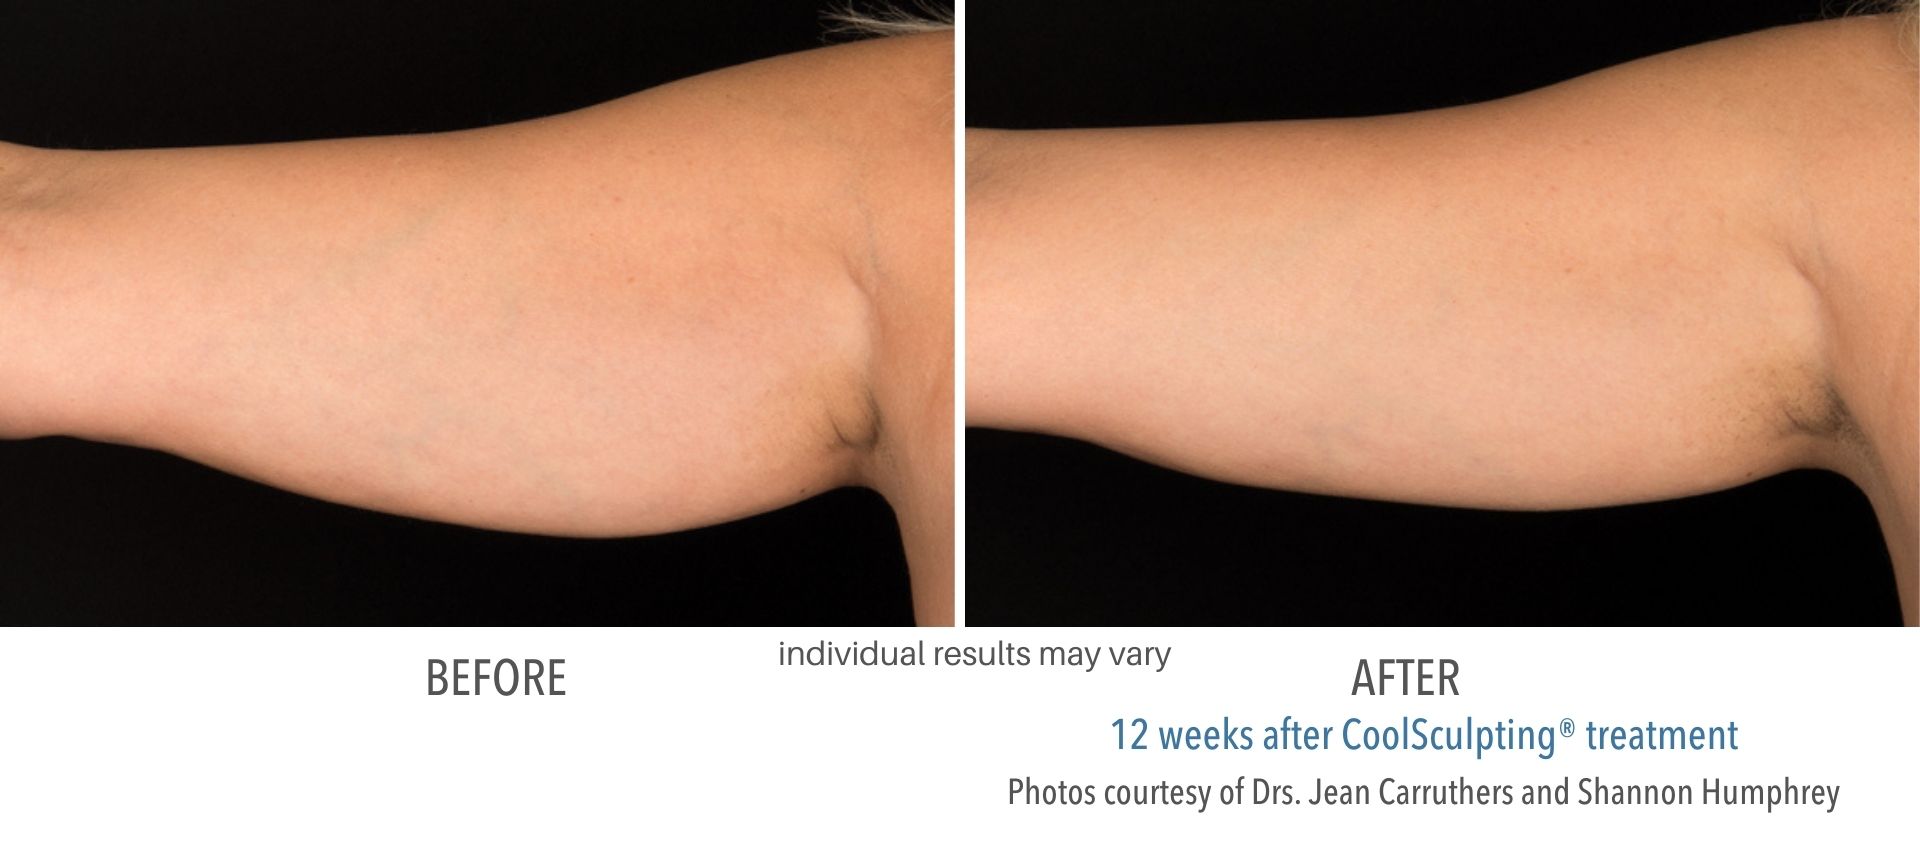 coolsculpting treatment upper arm fat area provided by Skin Suite RX.